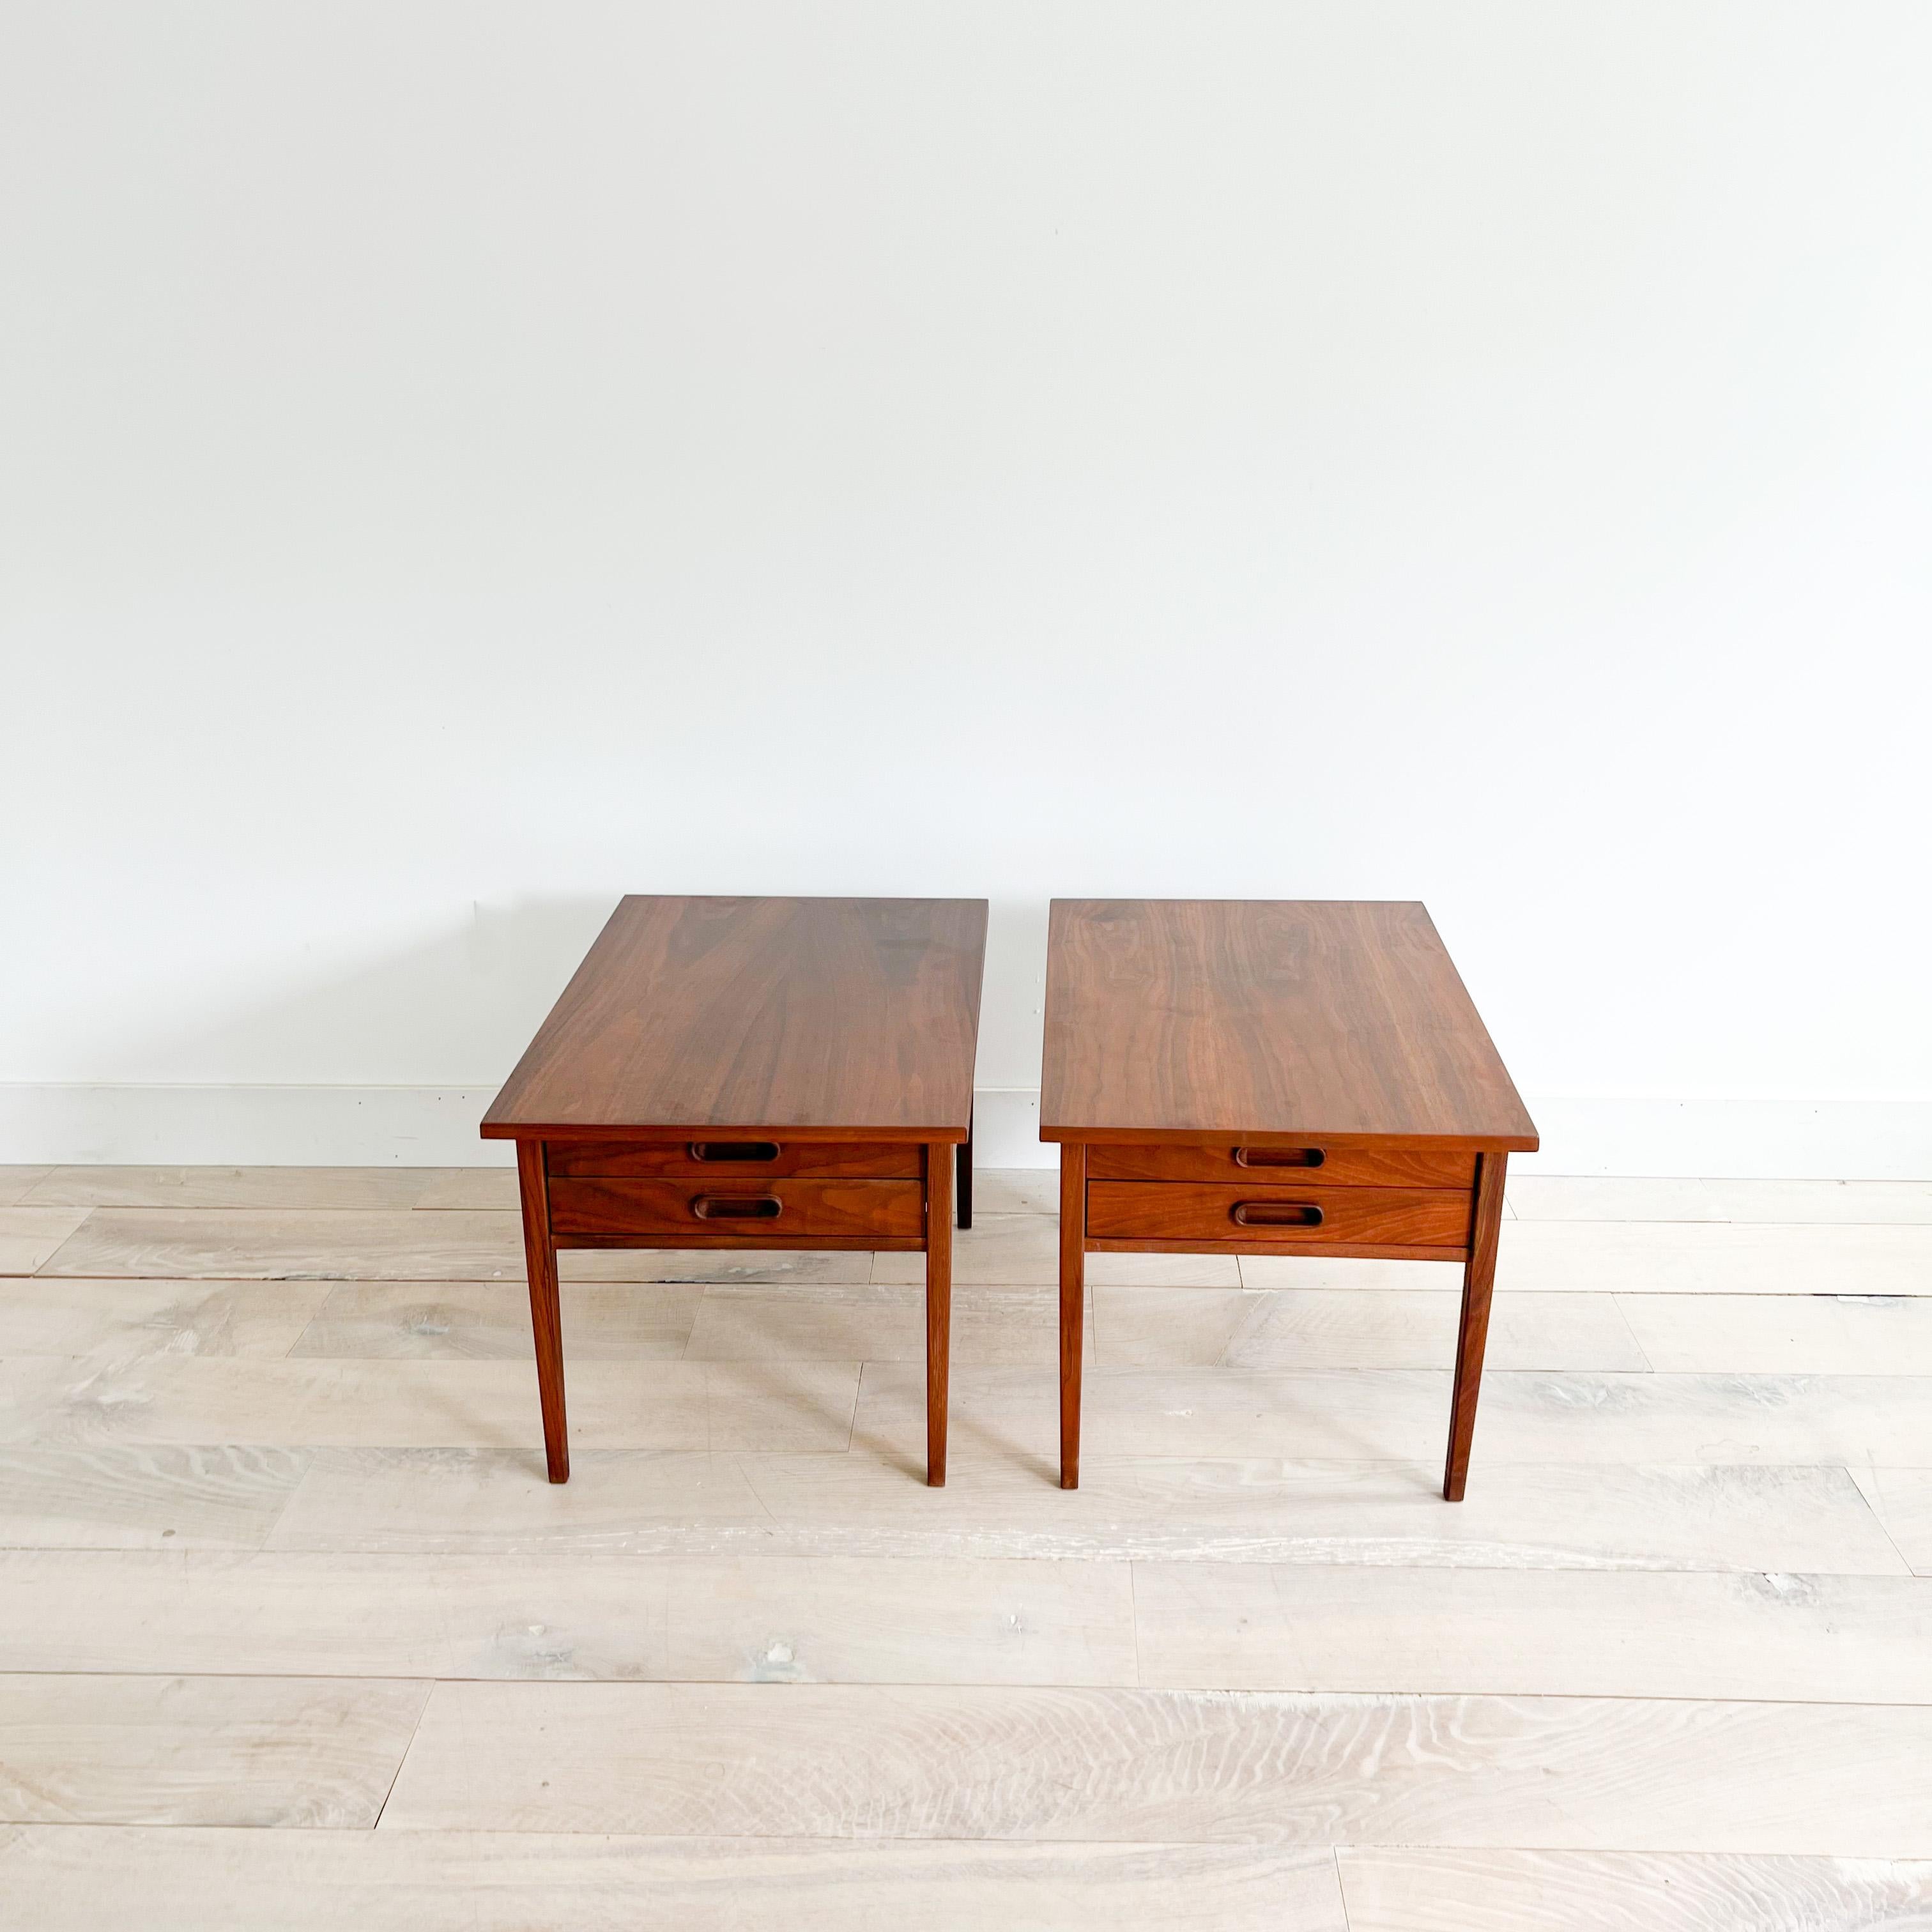 Pair of Mid-Century Modern walnut end tables by Jack Cartwright for Founders. The tops have been sanded and restored. Some light scuffing/scratching from age appropriate wear. Each end table has two drawers.

21”x30” 20.25”H.